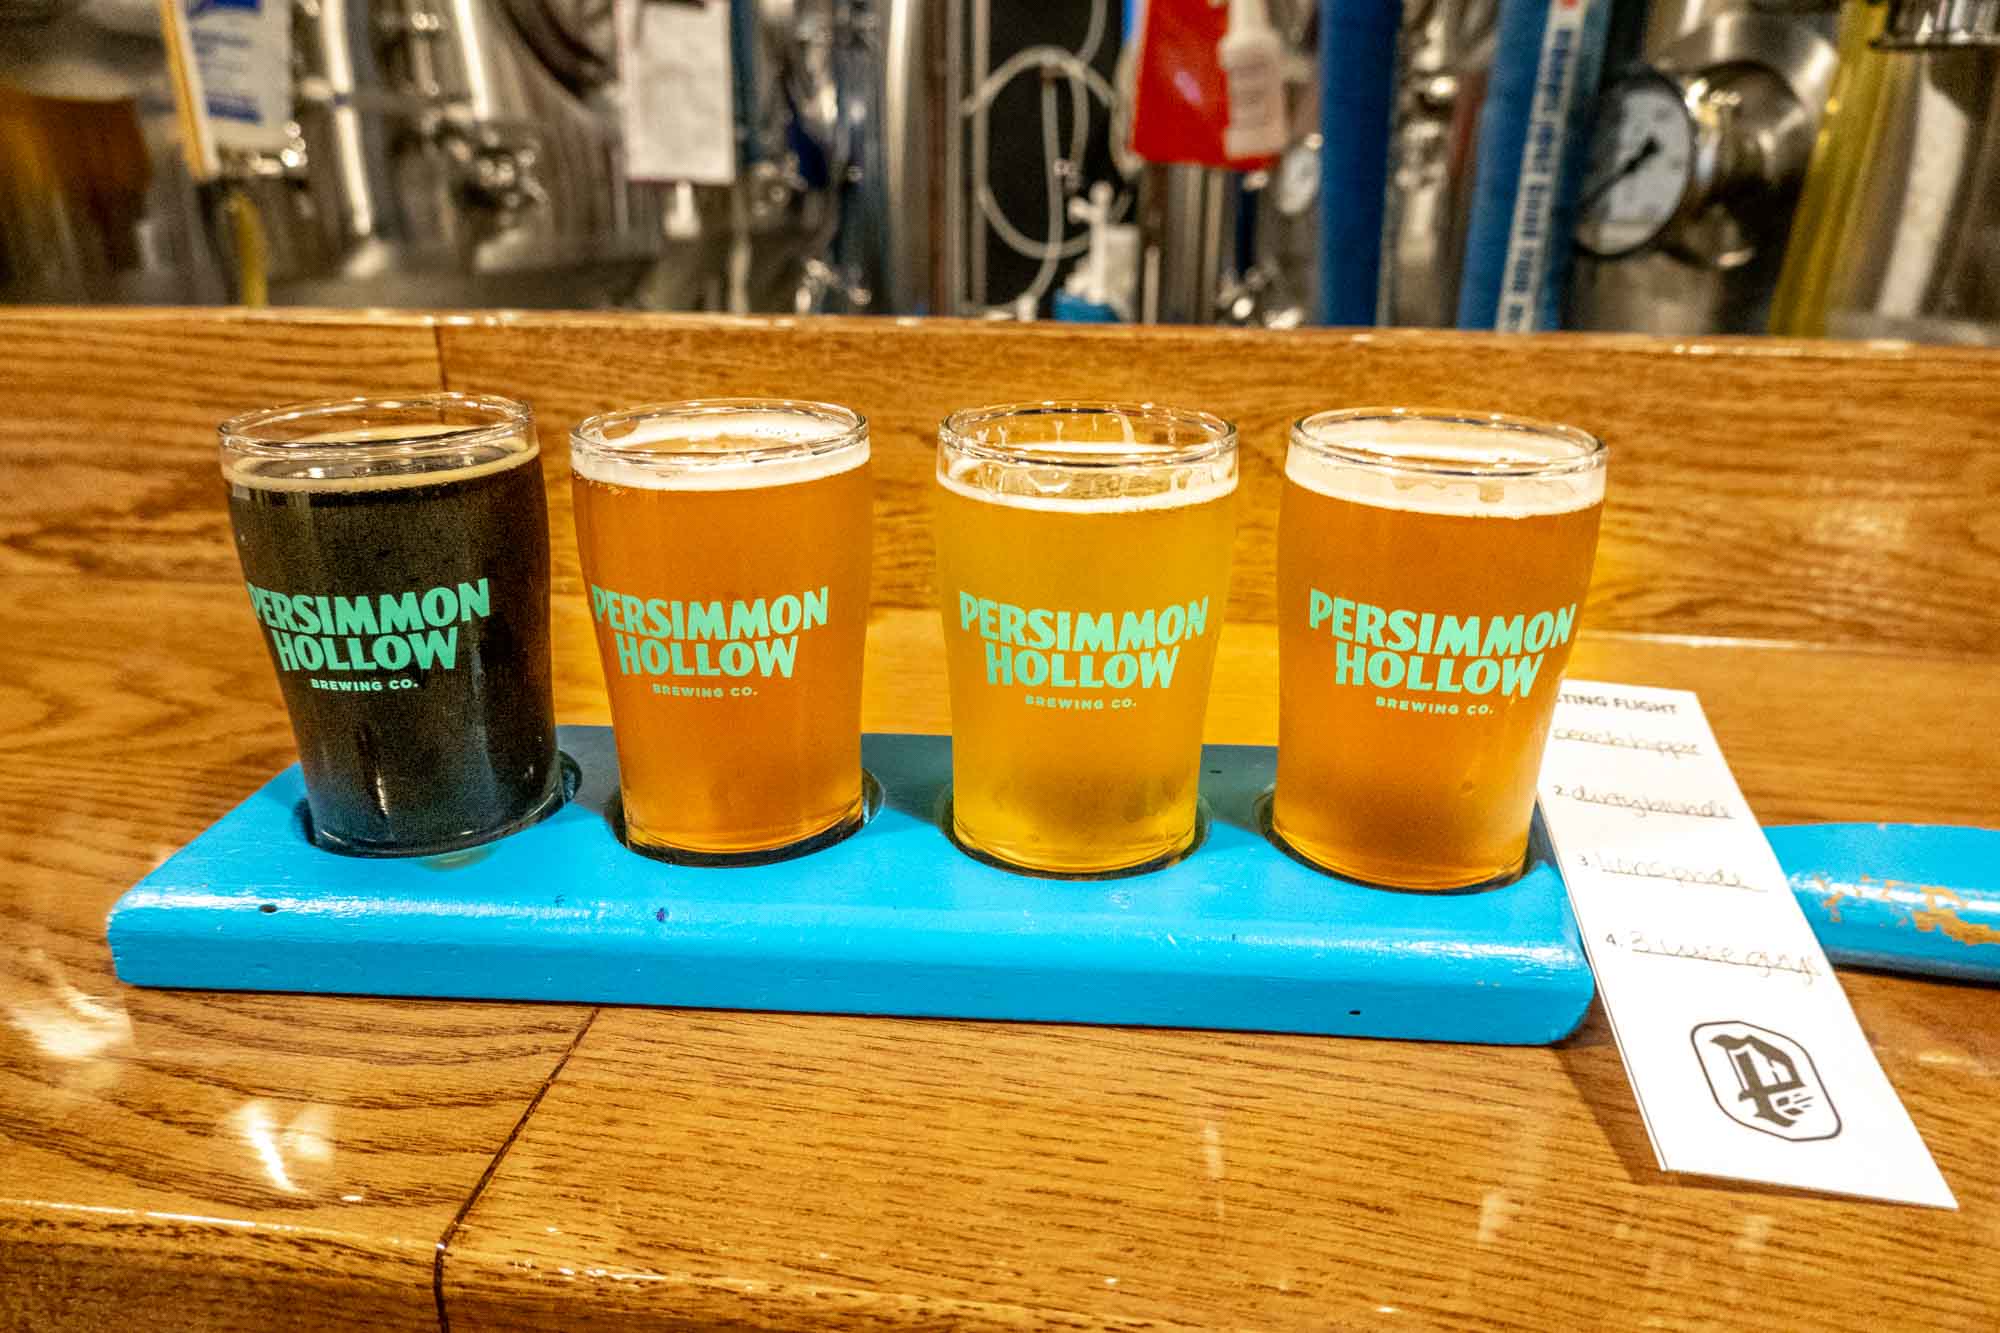 Flight of four beer glasses labeled "Persimmon Hollow Brewing Co." on a wooden bar.